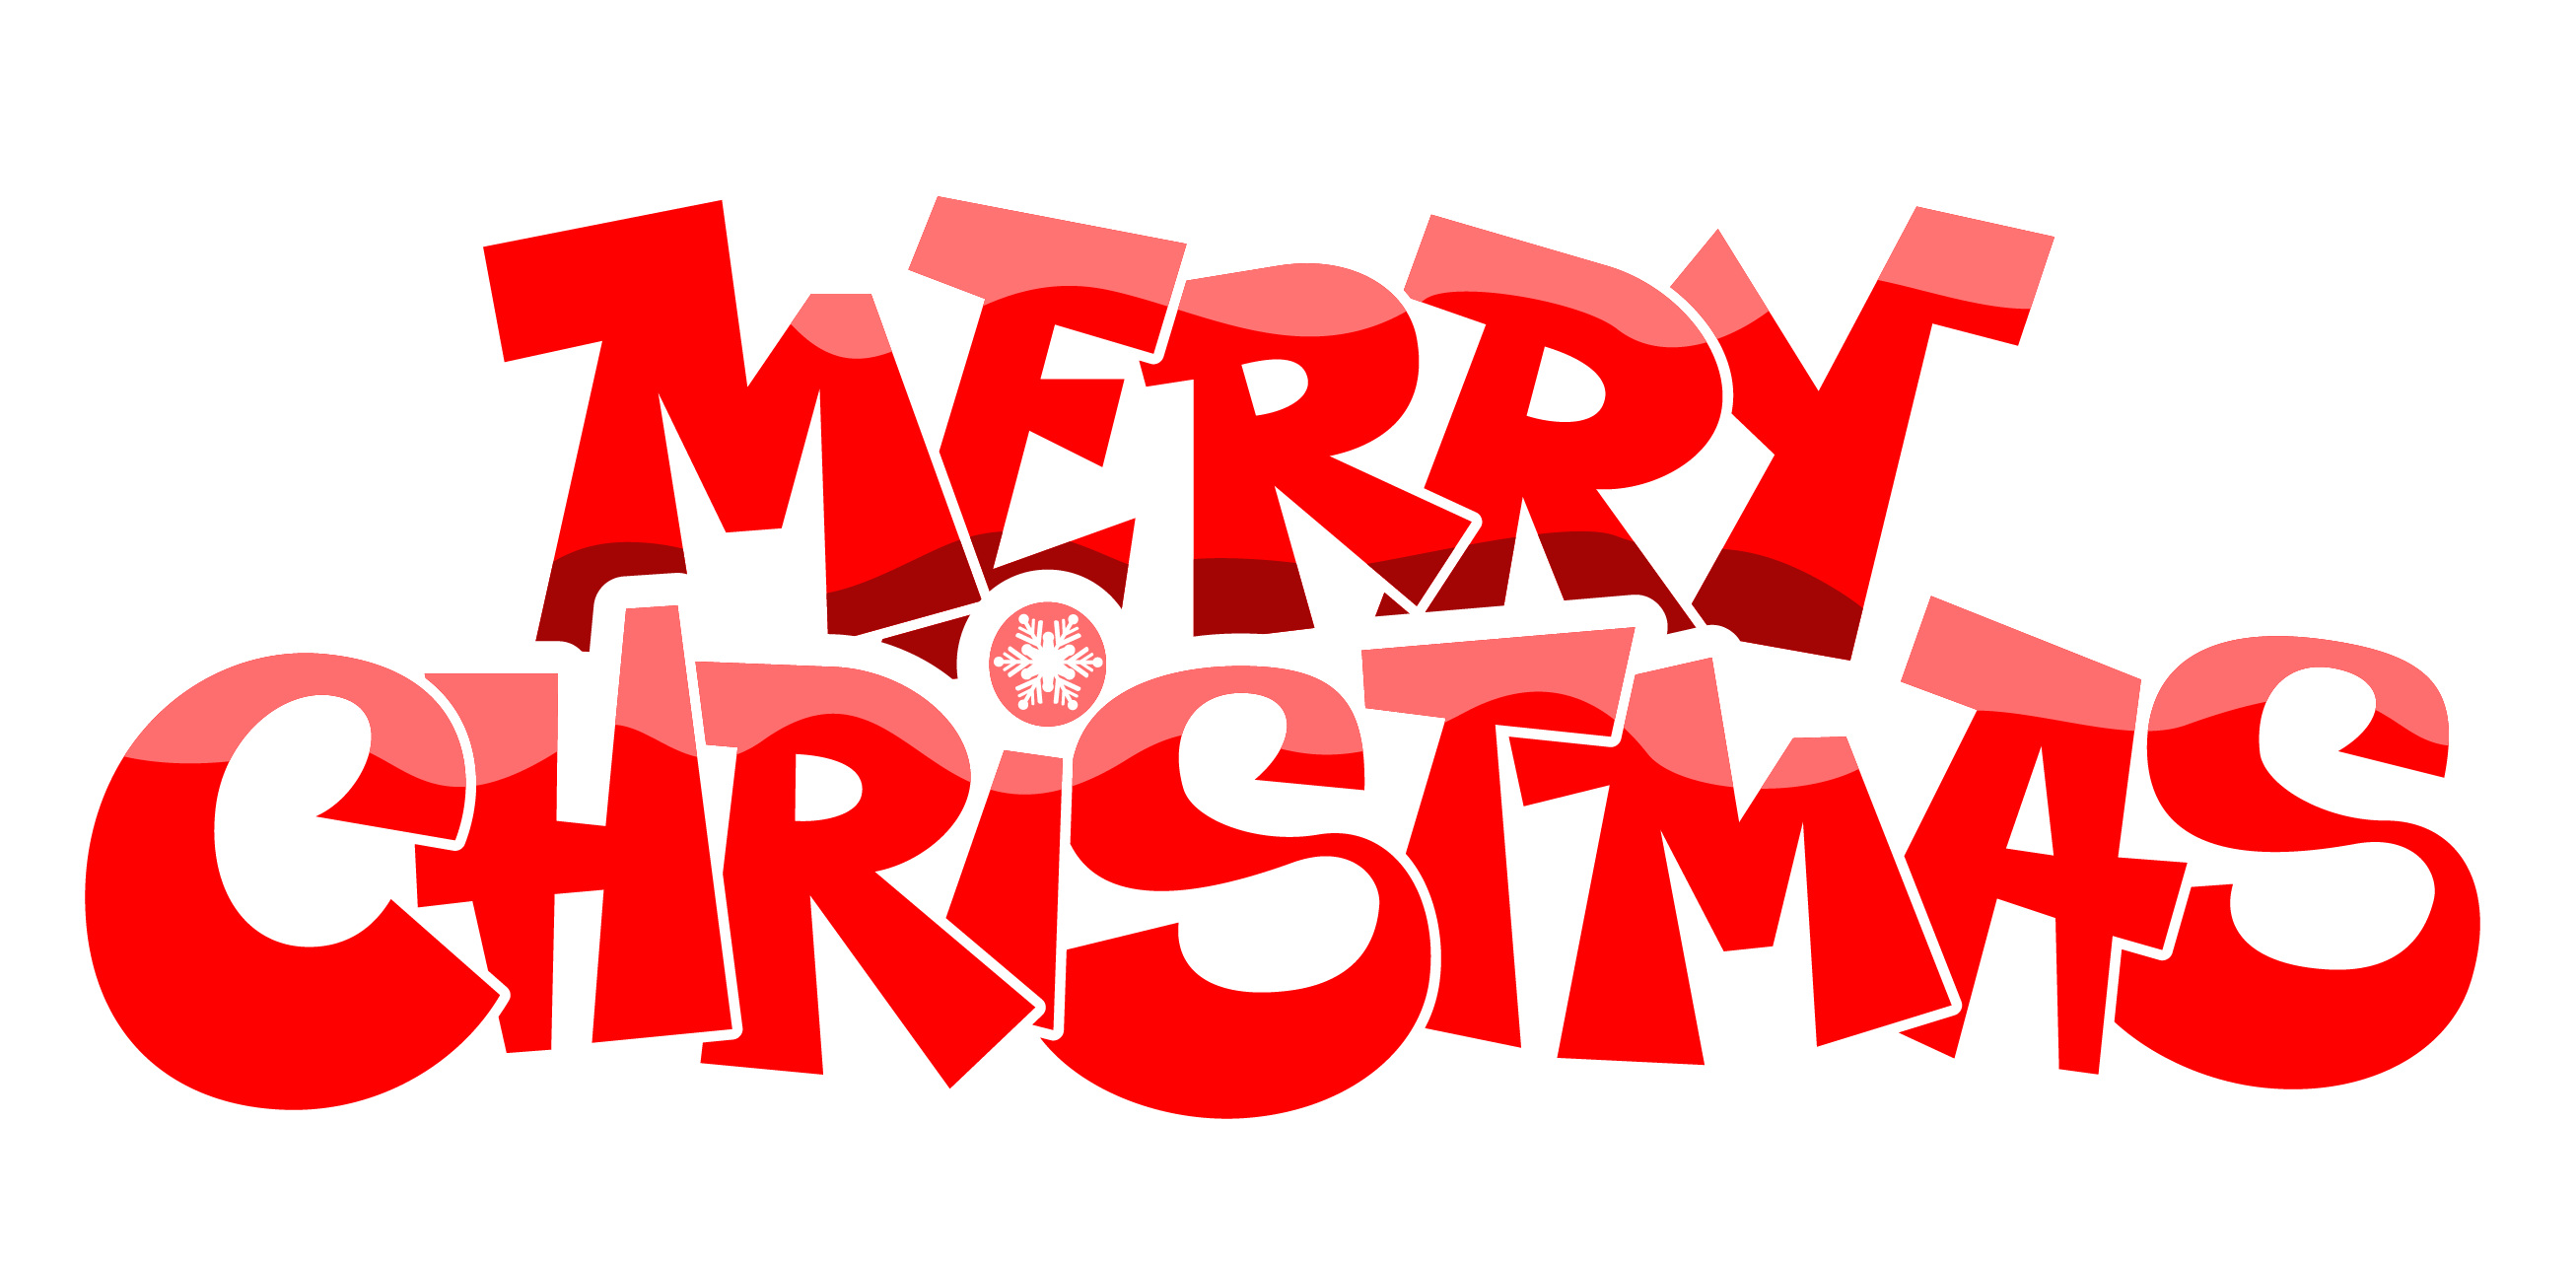 Google.com Christmas Logo - Merry Christmas Transparent PNG Picture Icon and PNG